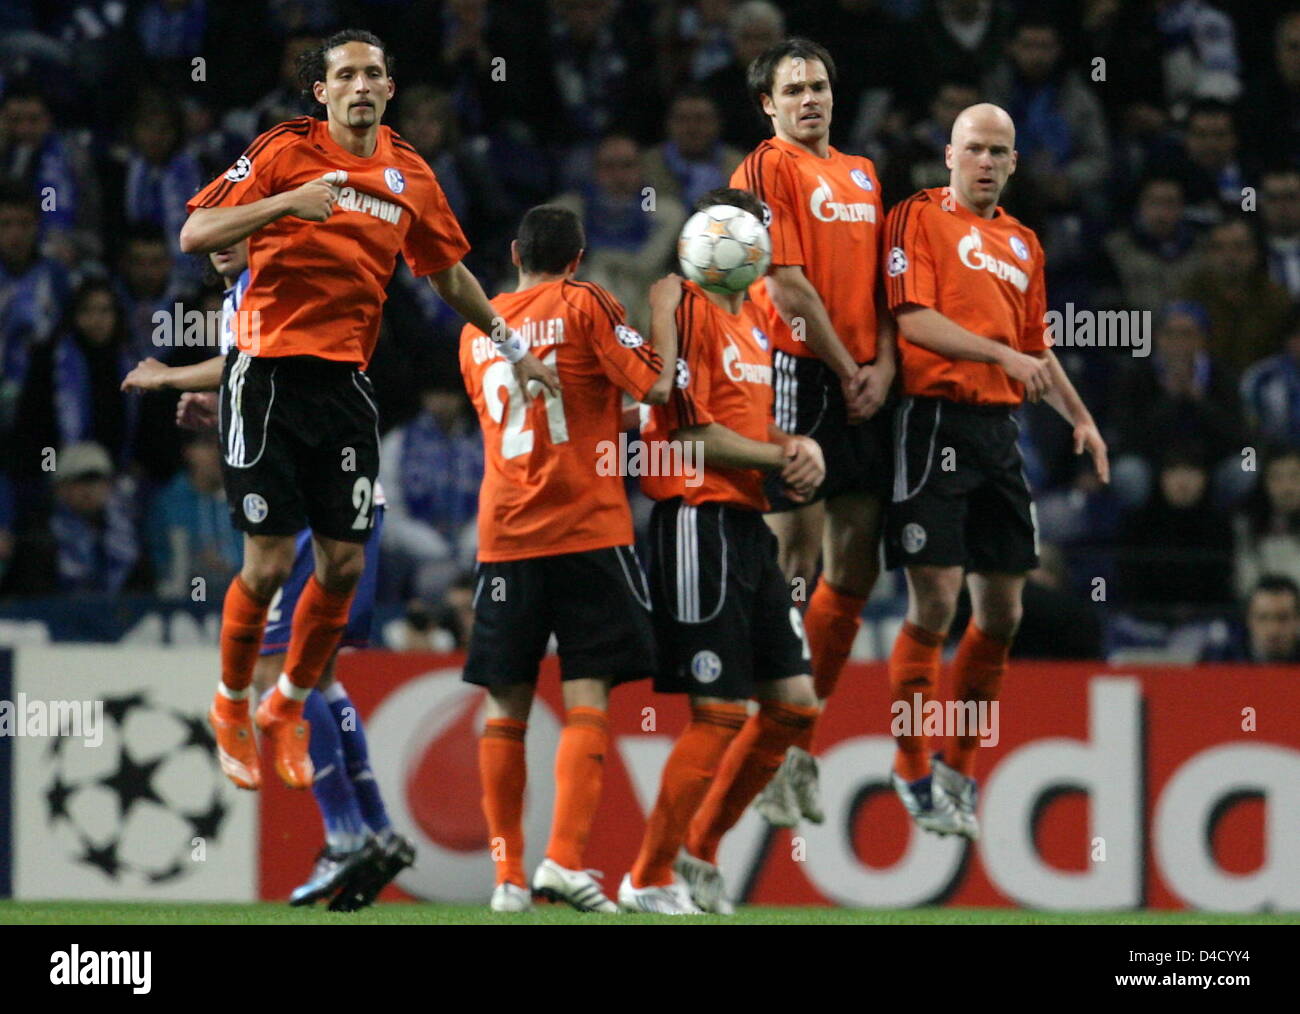 Schalke's wall (L-R) Kevin Kuranyi, Carlos Grossmueller, Marcelo Bordon, Heiko Westermann and Fabian Ernst block a free-kick in the 2nd leg of UEFA Champions League 1st knockout round tie FC Porto v FC Schalke 04 at Dragao stadium of Porto, Portugal, 05 March 2008. Germany's Schalke won the 2nd leg over the Portuguese side 4-1 p.s.o. and moves up to quarter-finals with a 5-1 win on Stock Photo